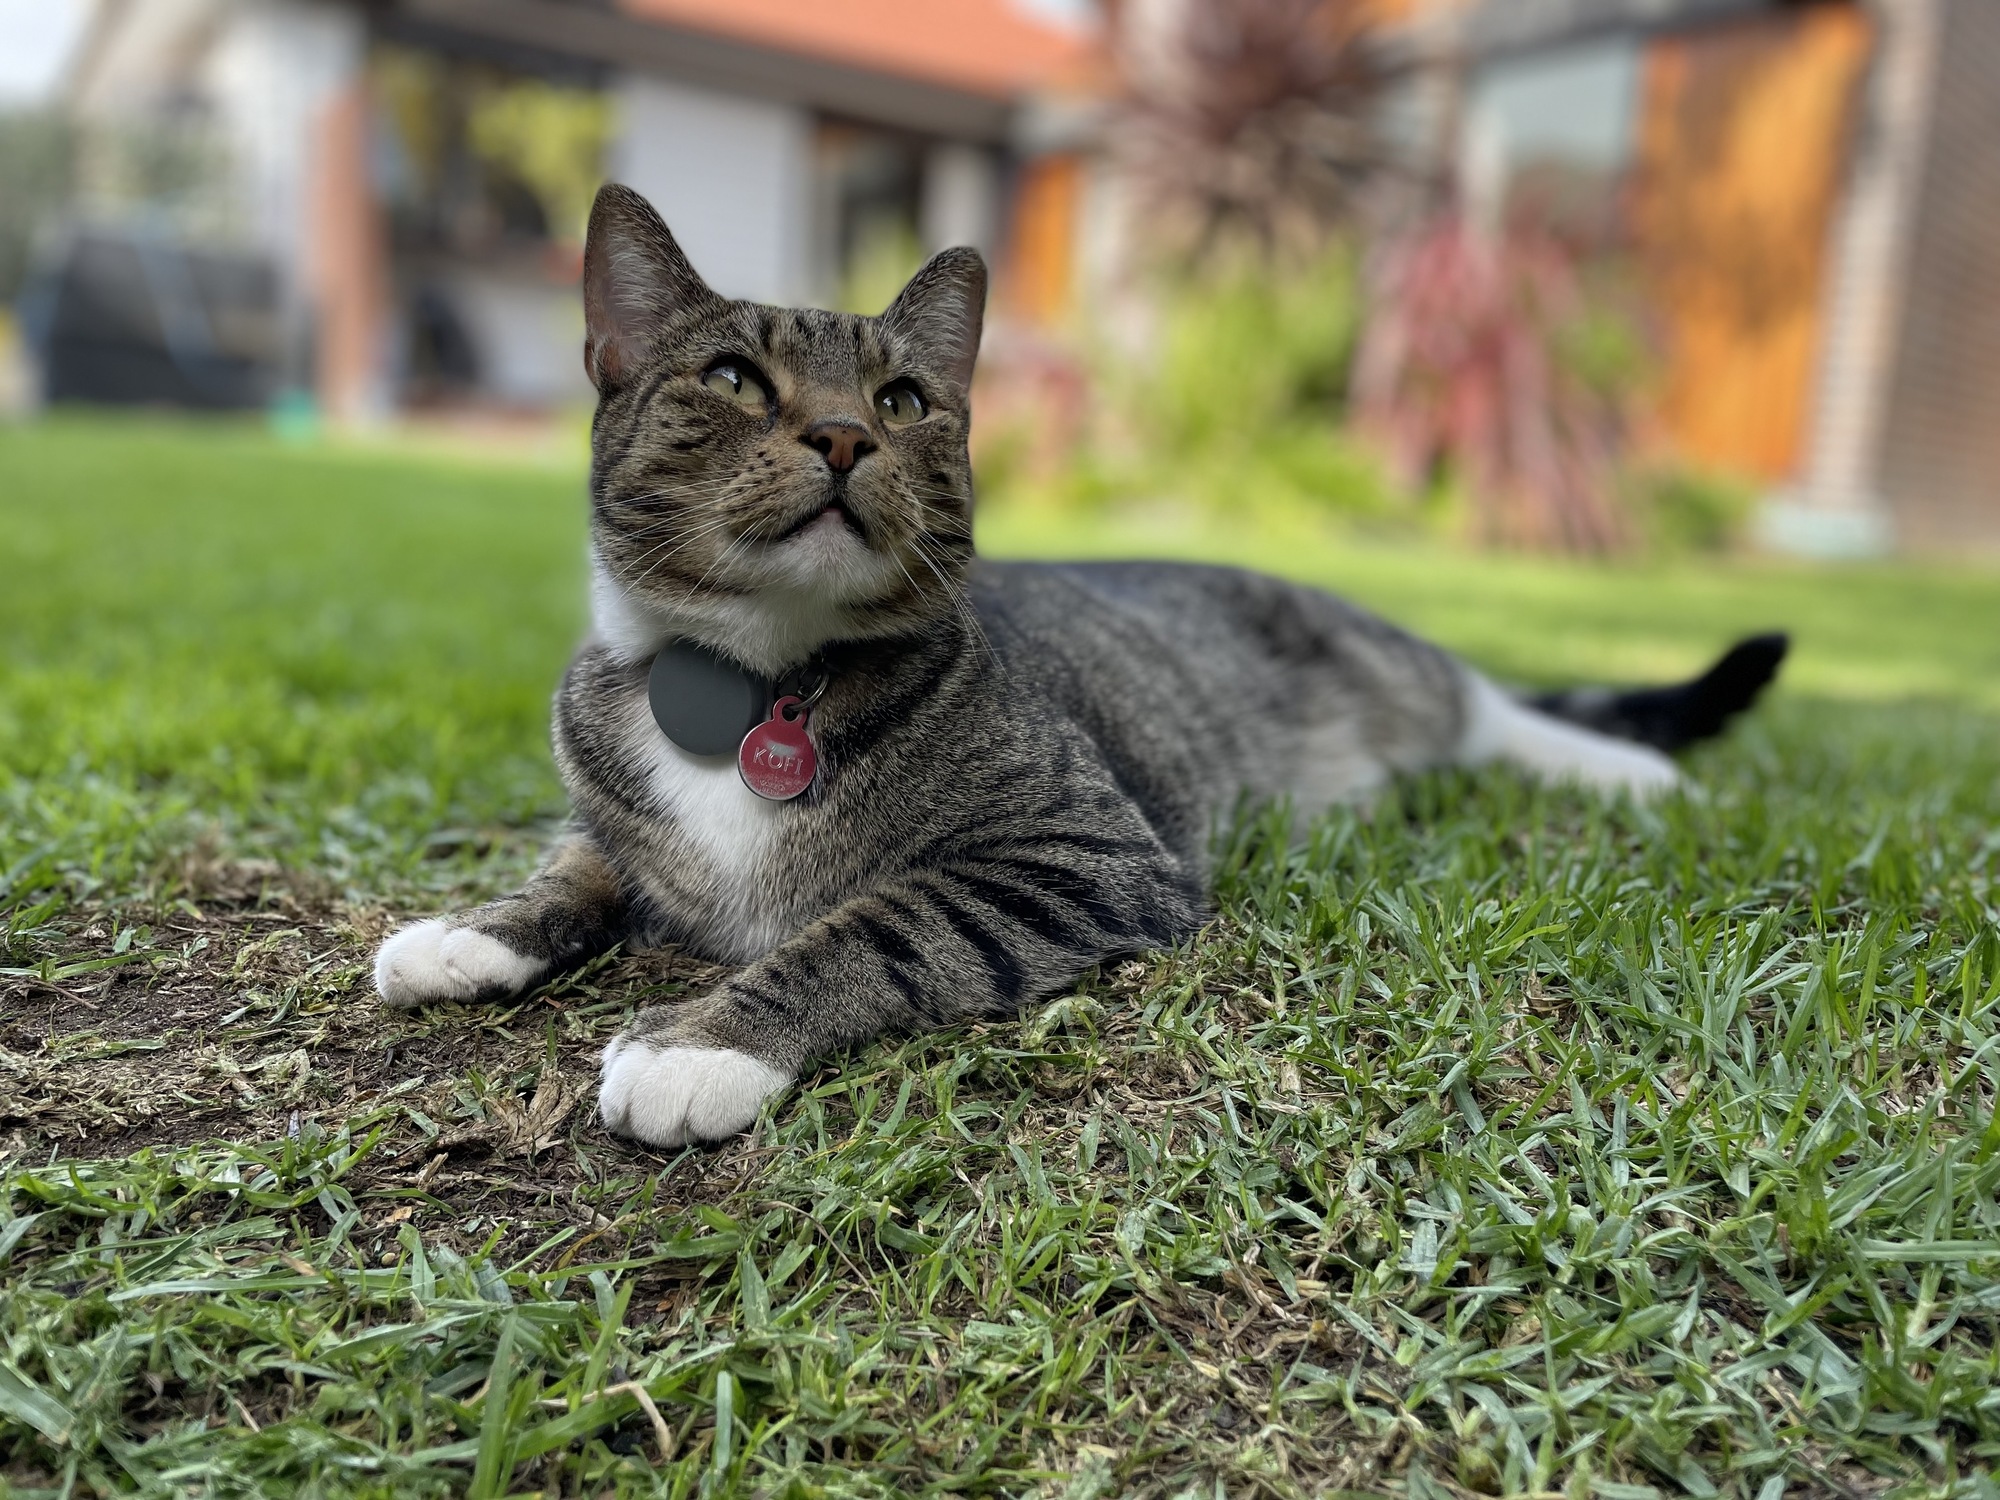 A grey tabby cat on the grass